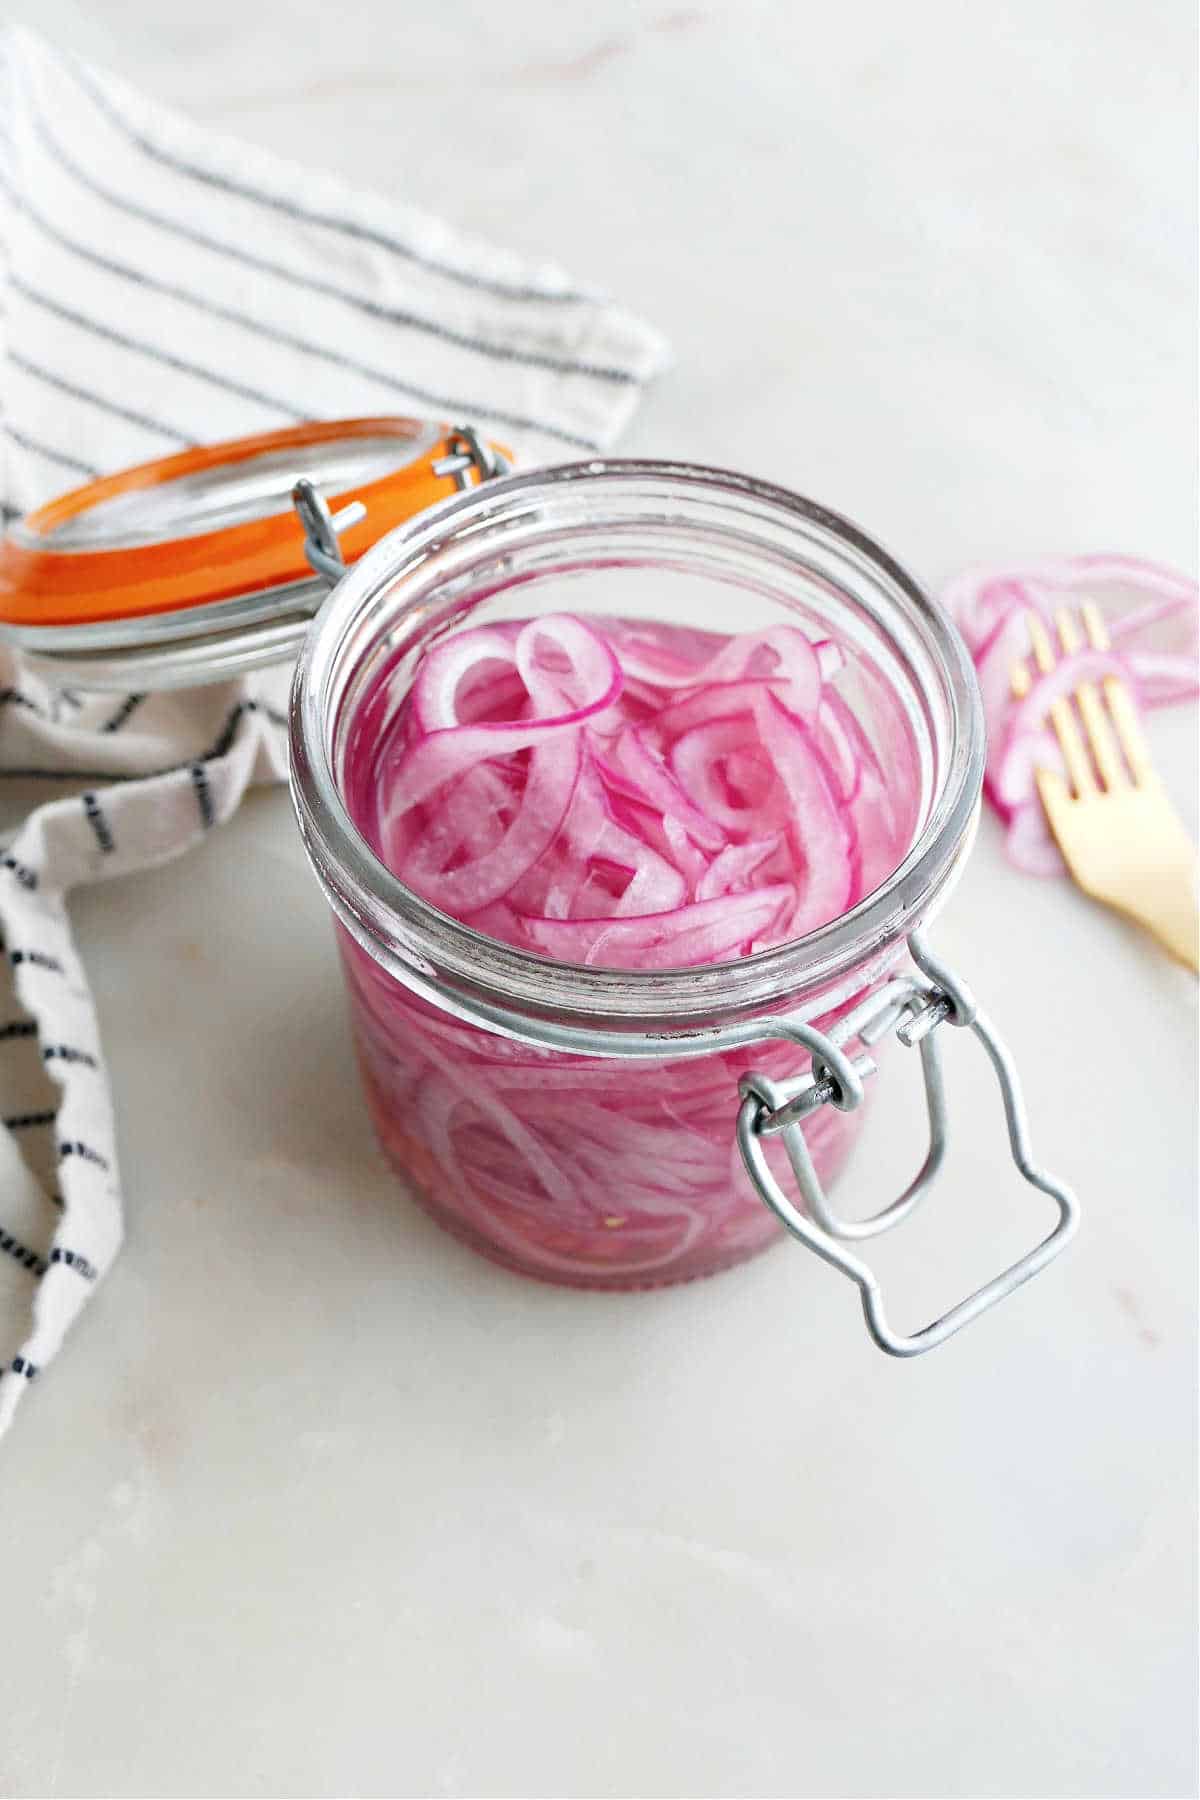 pickled red onions sitting in a brine in a jar on a counter